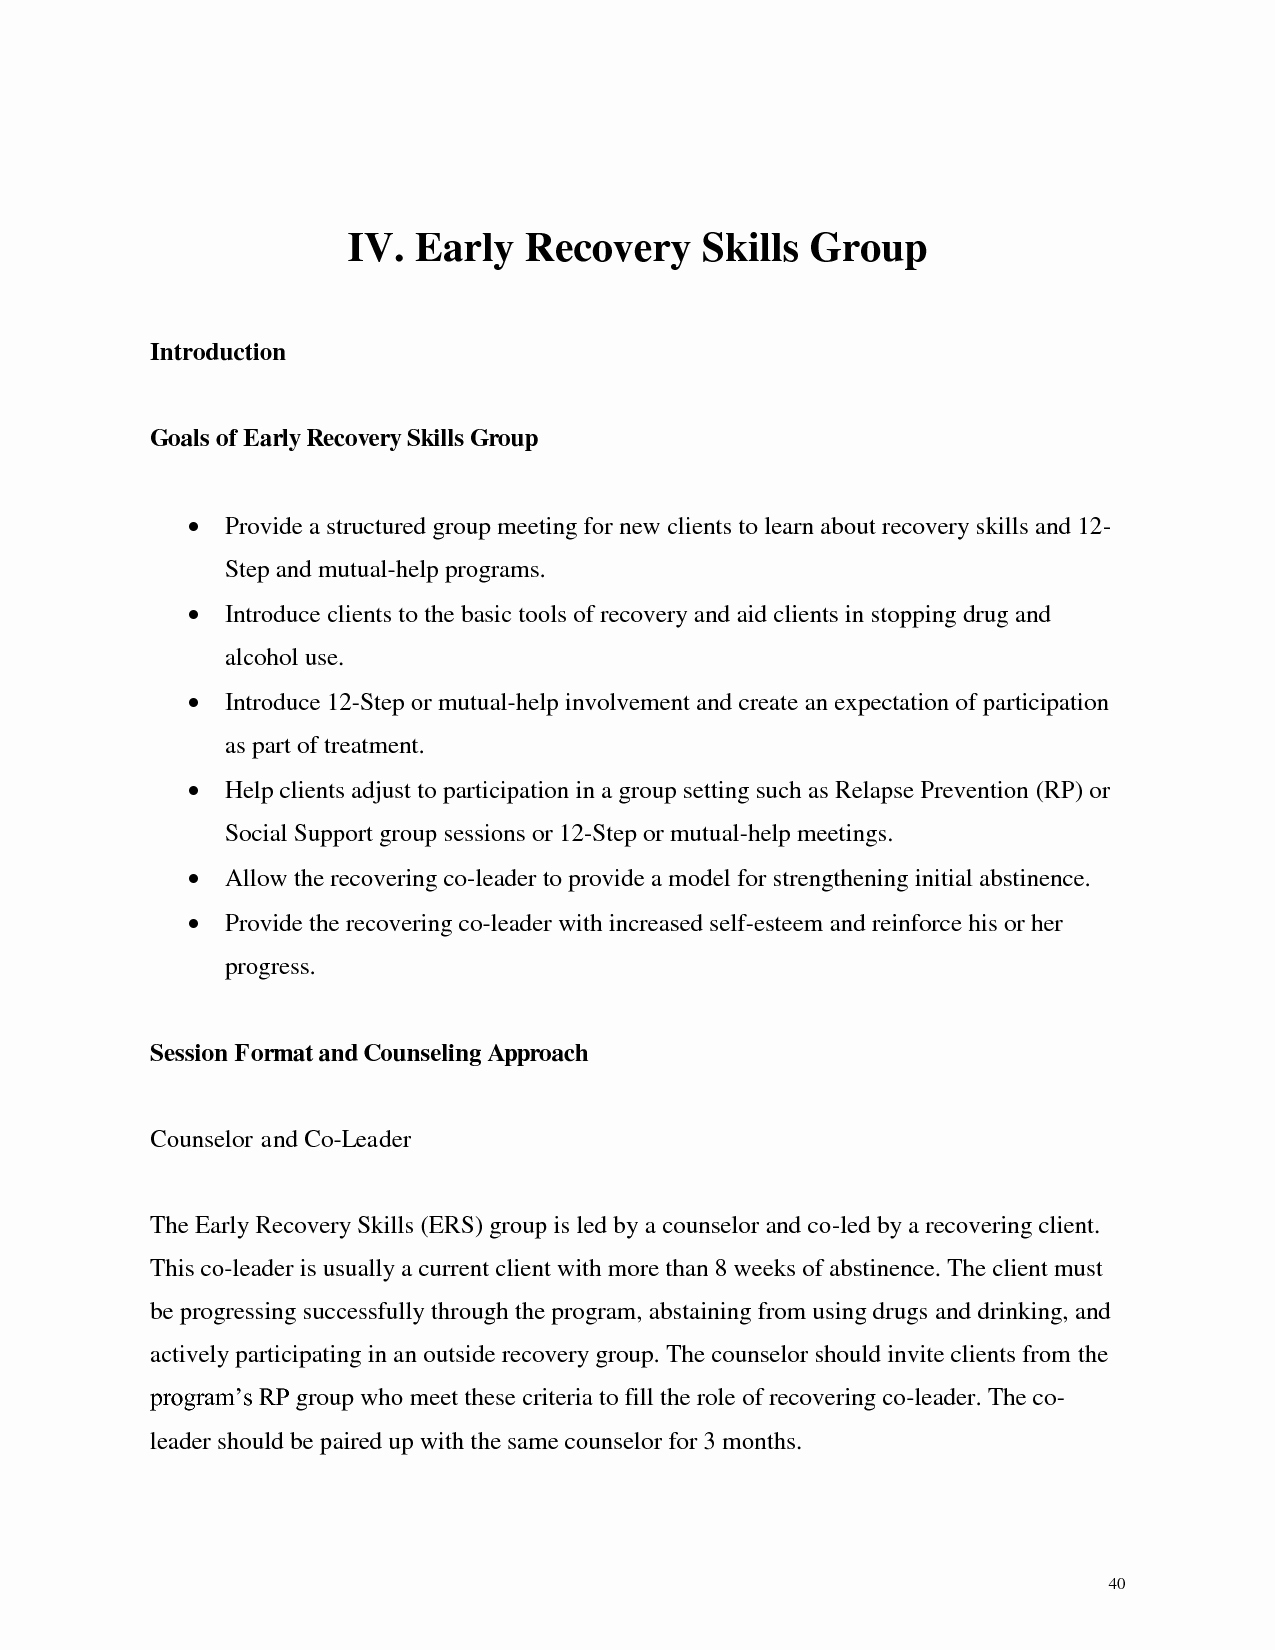 Life Skills Worksheets For Recovering Addicts Lovely 16 Best